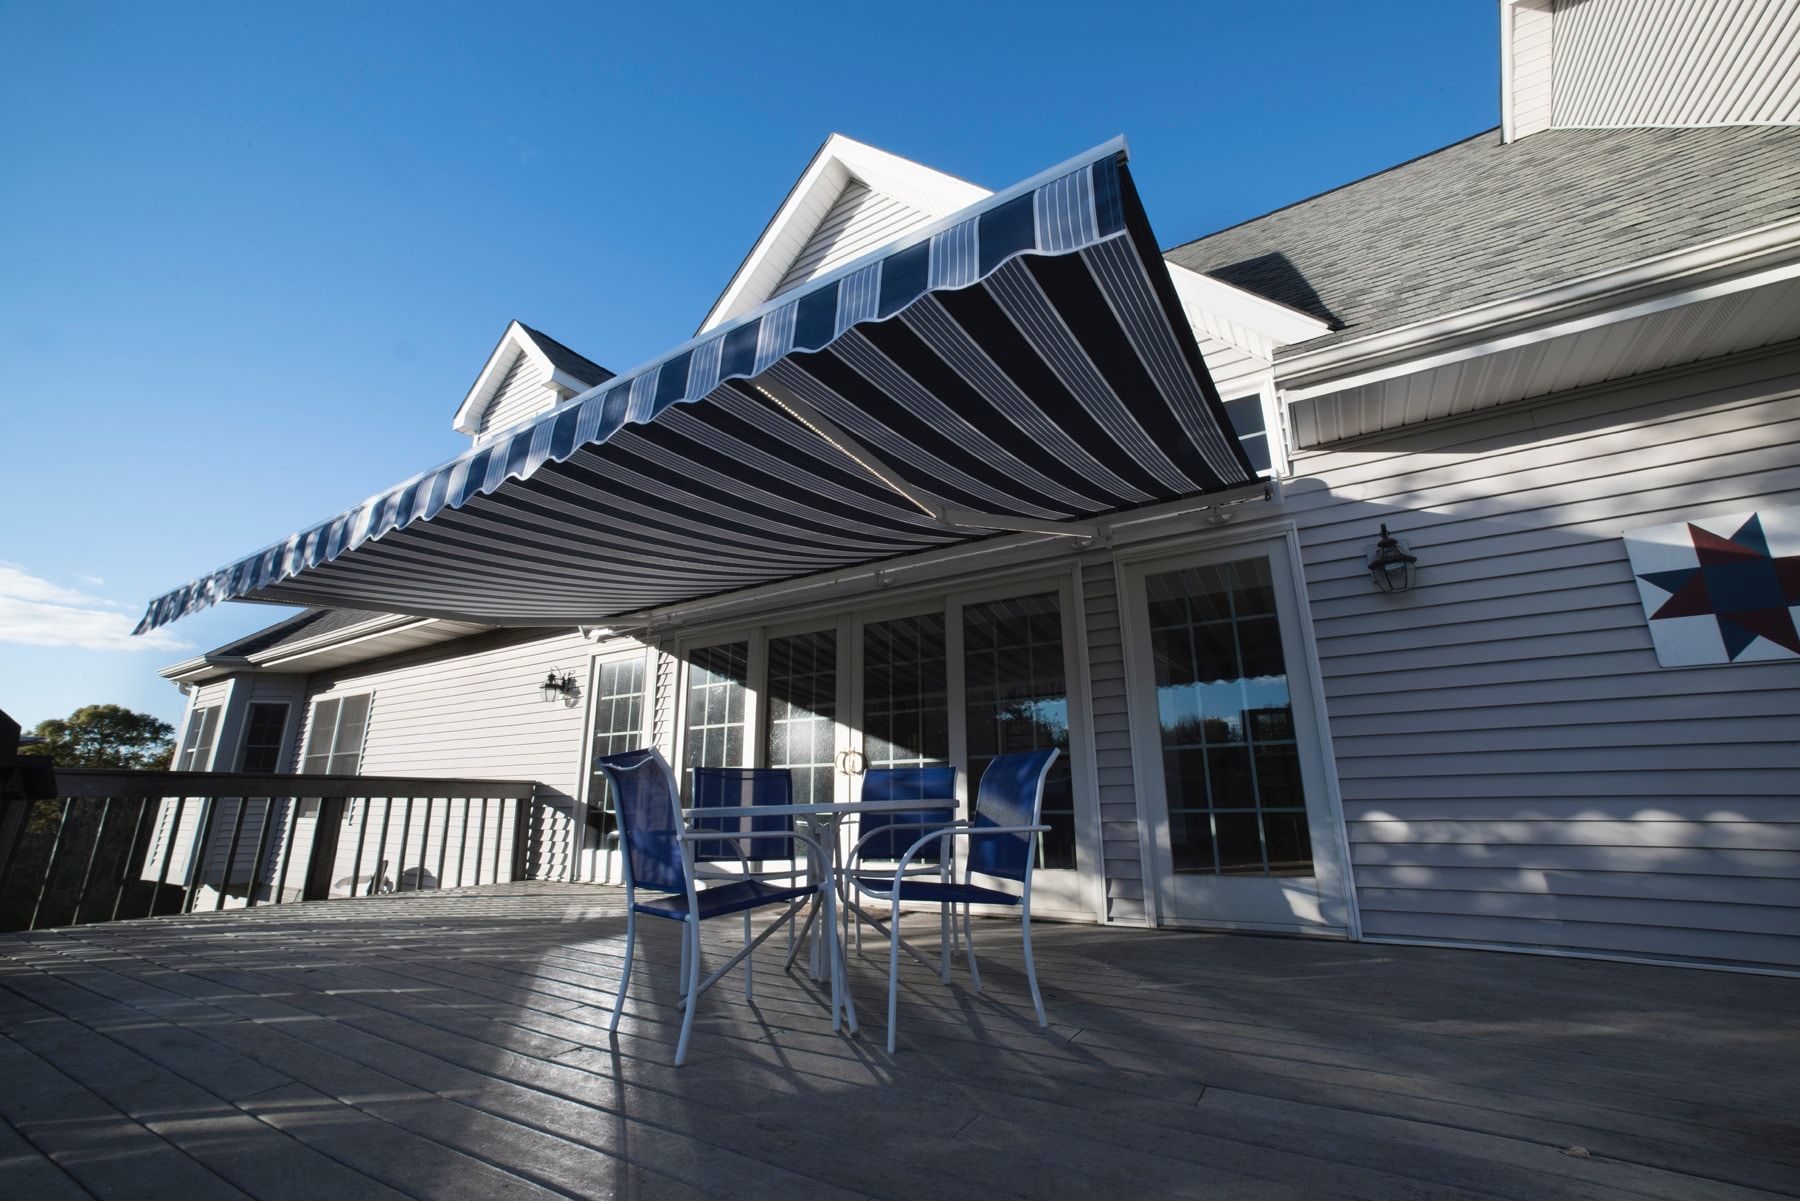 Retractable Awnings Image